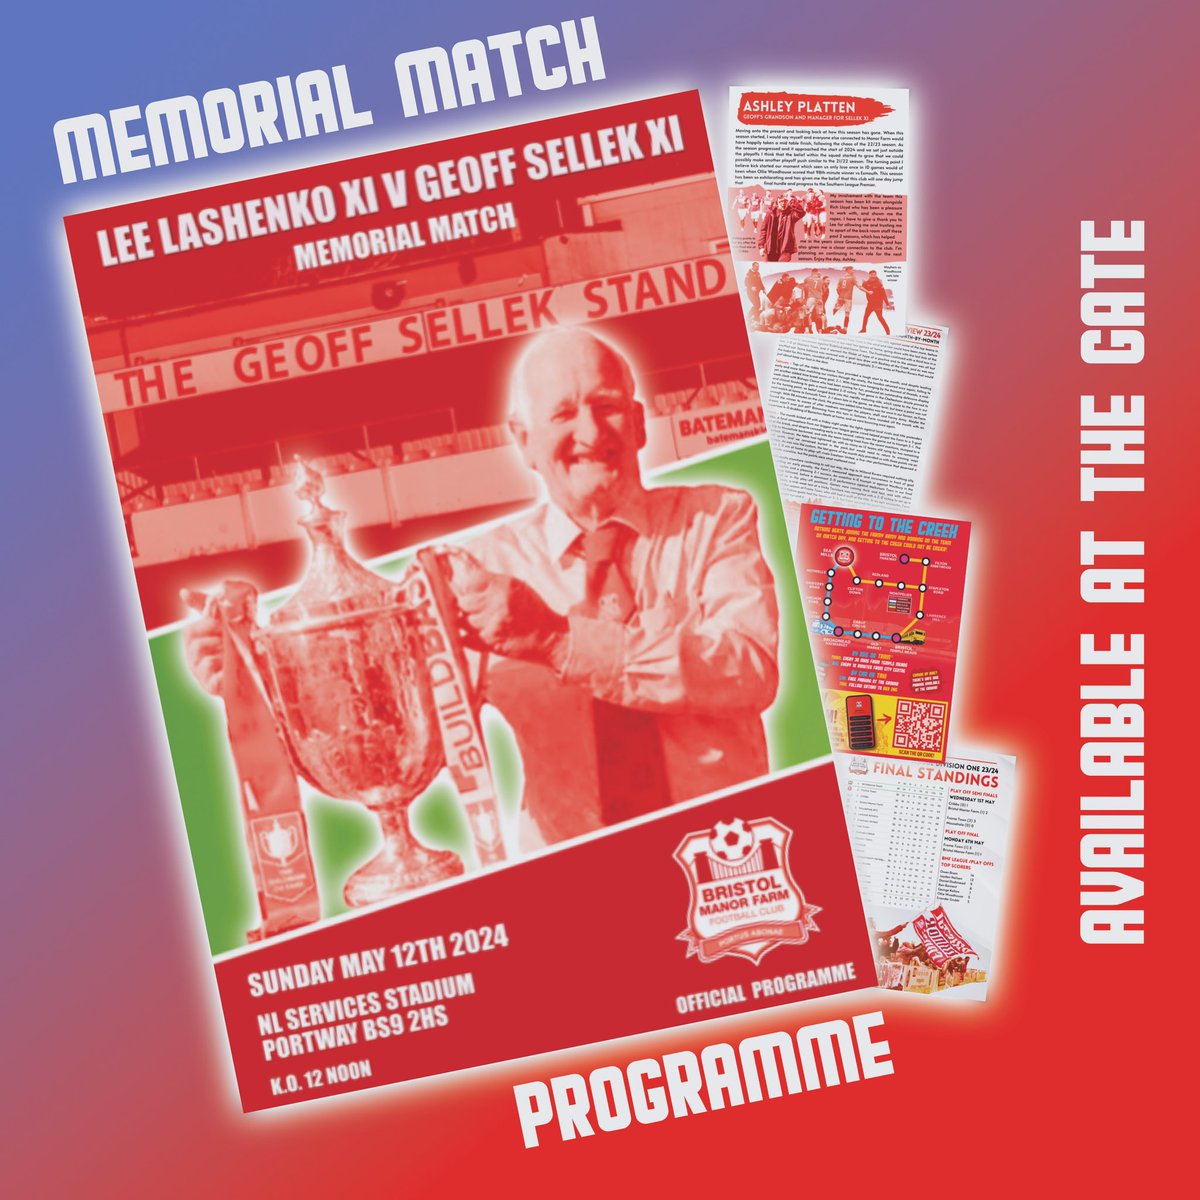 Season is over but there’s one more programme to go, and it’s a special one for the Geoff Sellek Memorial Match on Sunday May 12th, with the current squad and returning legends on the hallowed Creek turf at 12 noon.. if you go down, pick up a copy! @ManorFarmFC